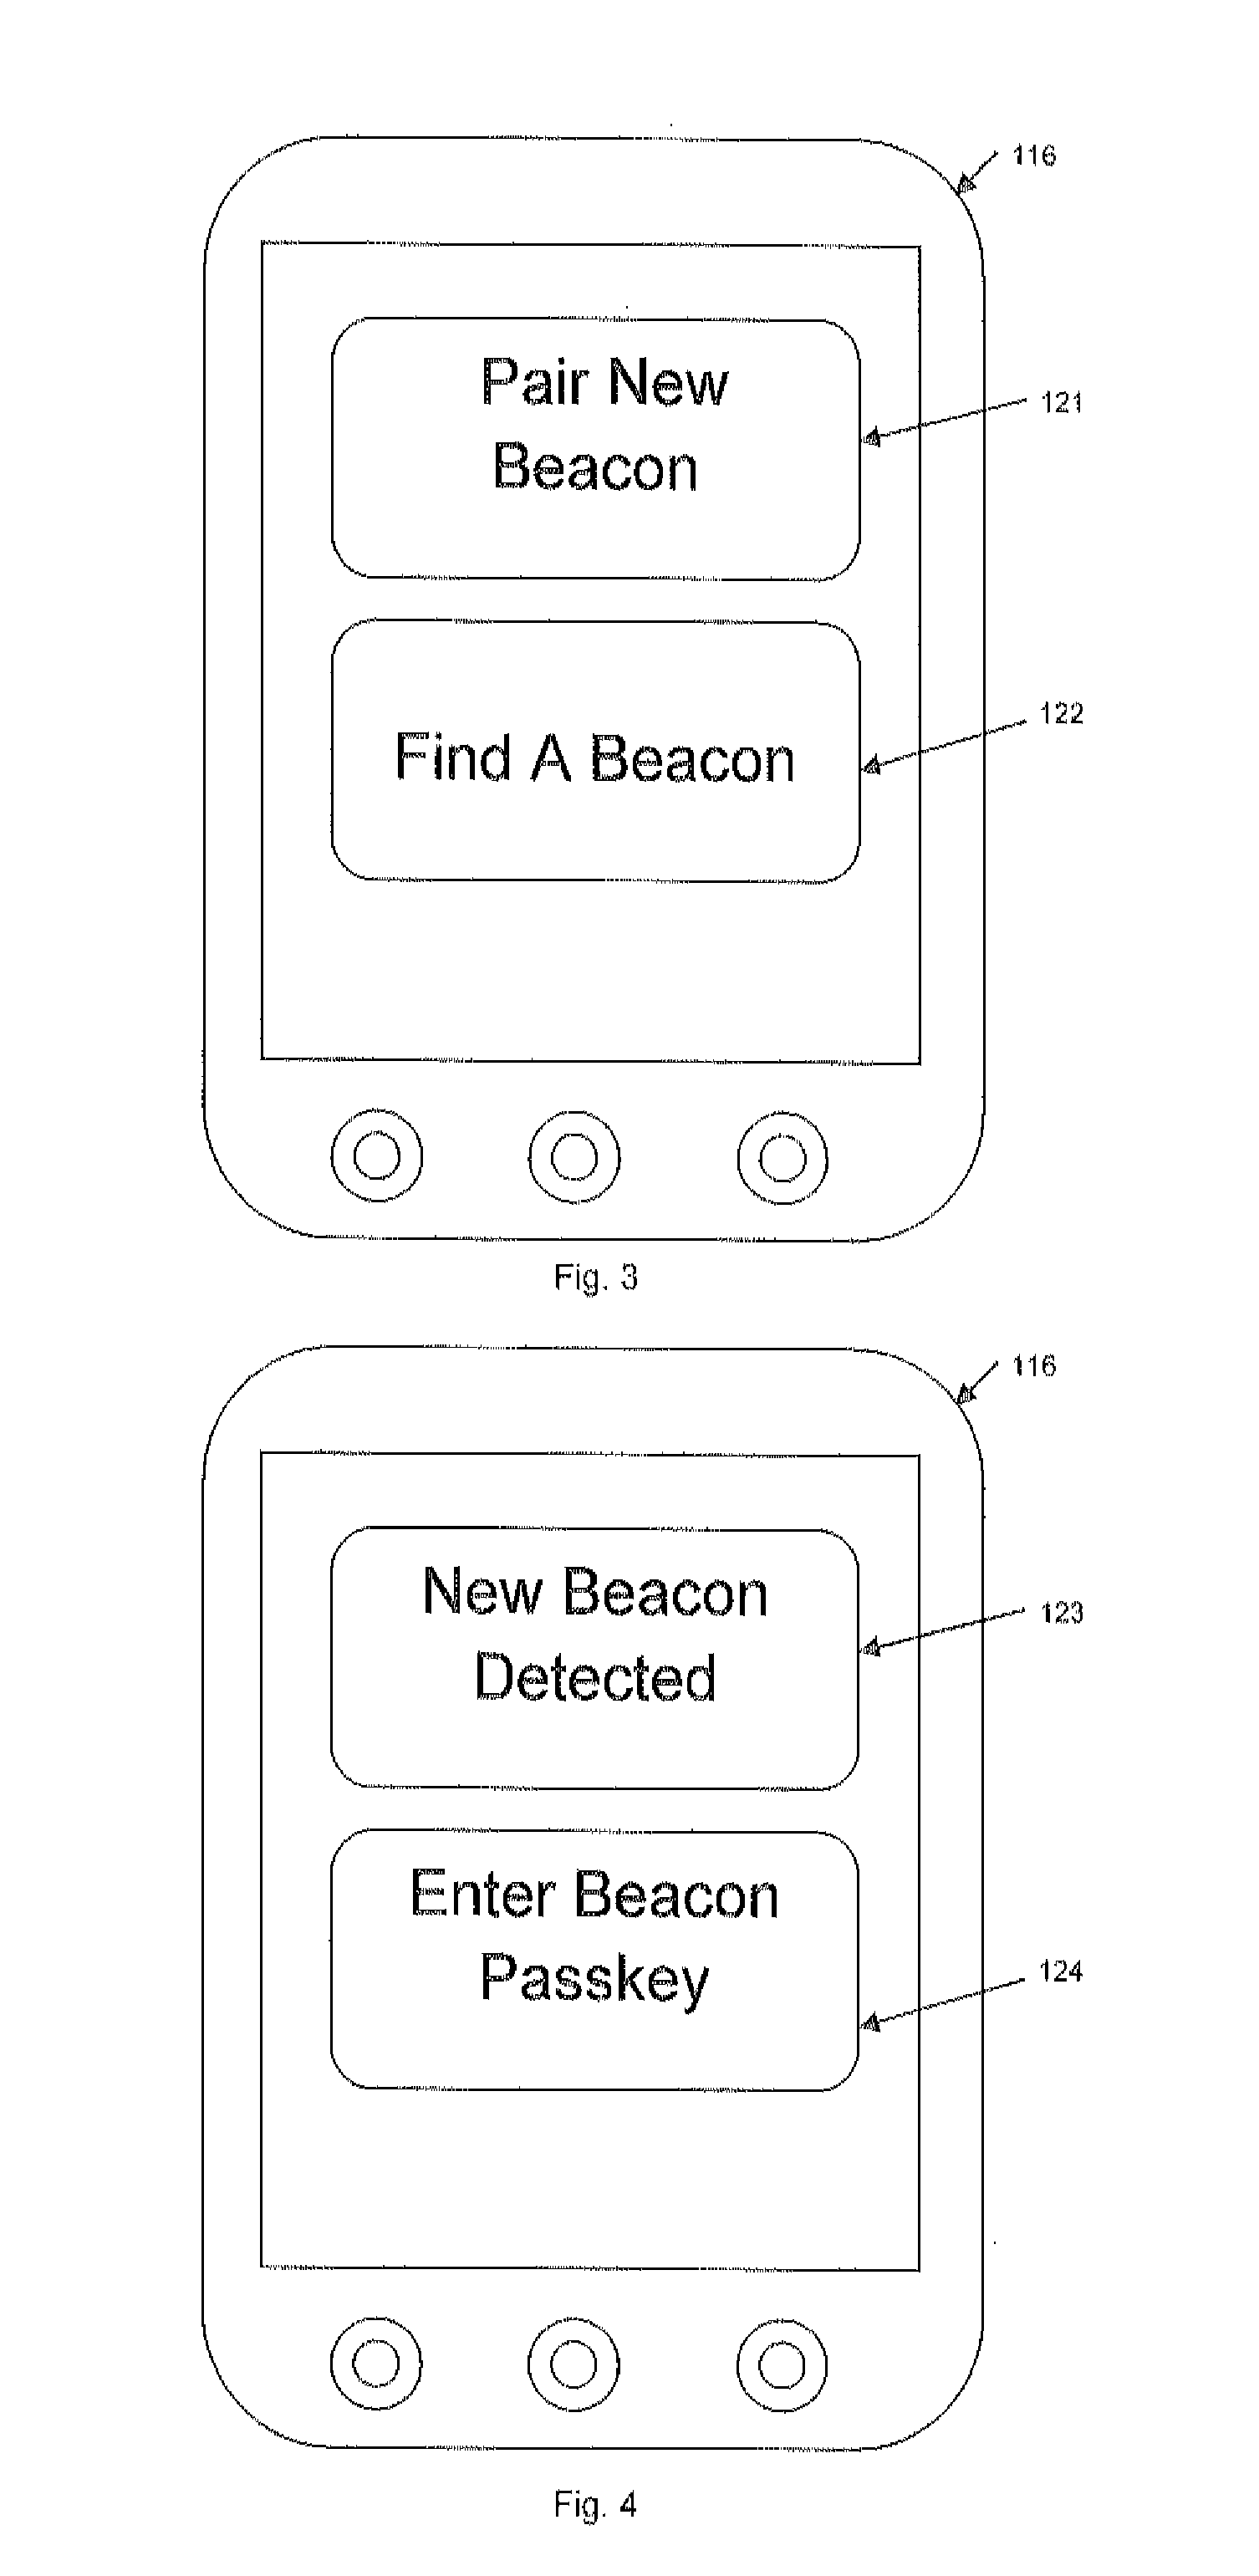 Apparatus and Method for Using a Wireless Mobile Handset Application to Locate Beacons